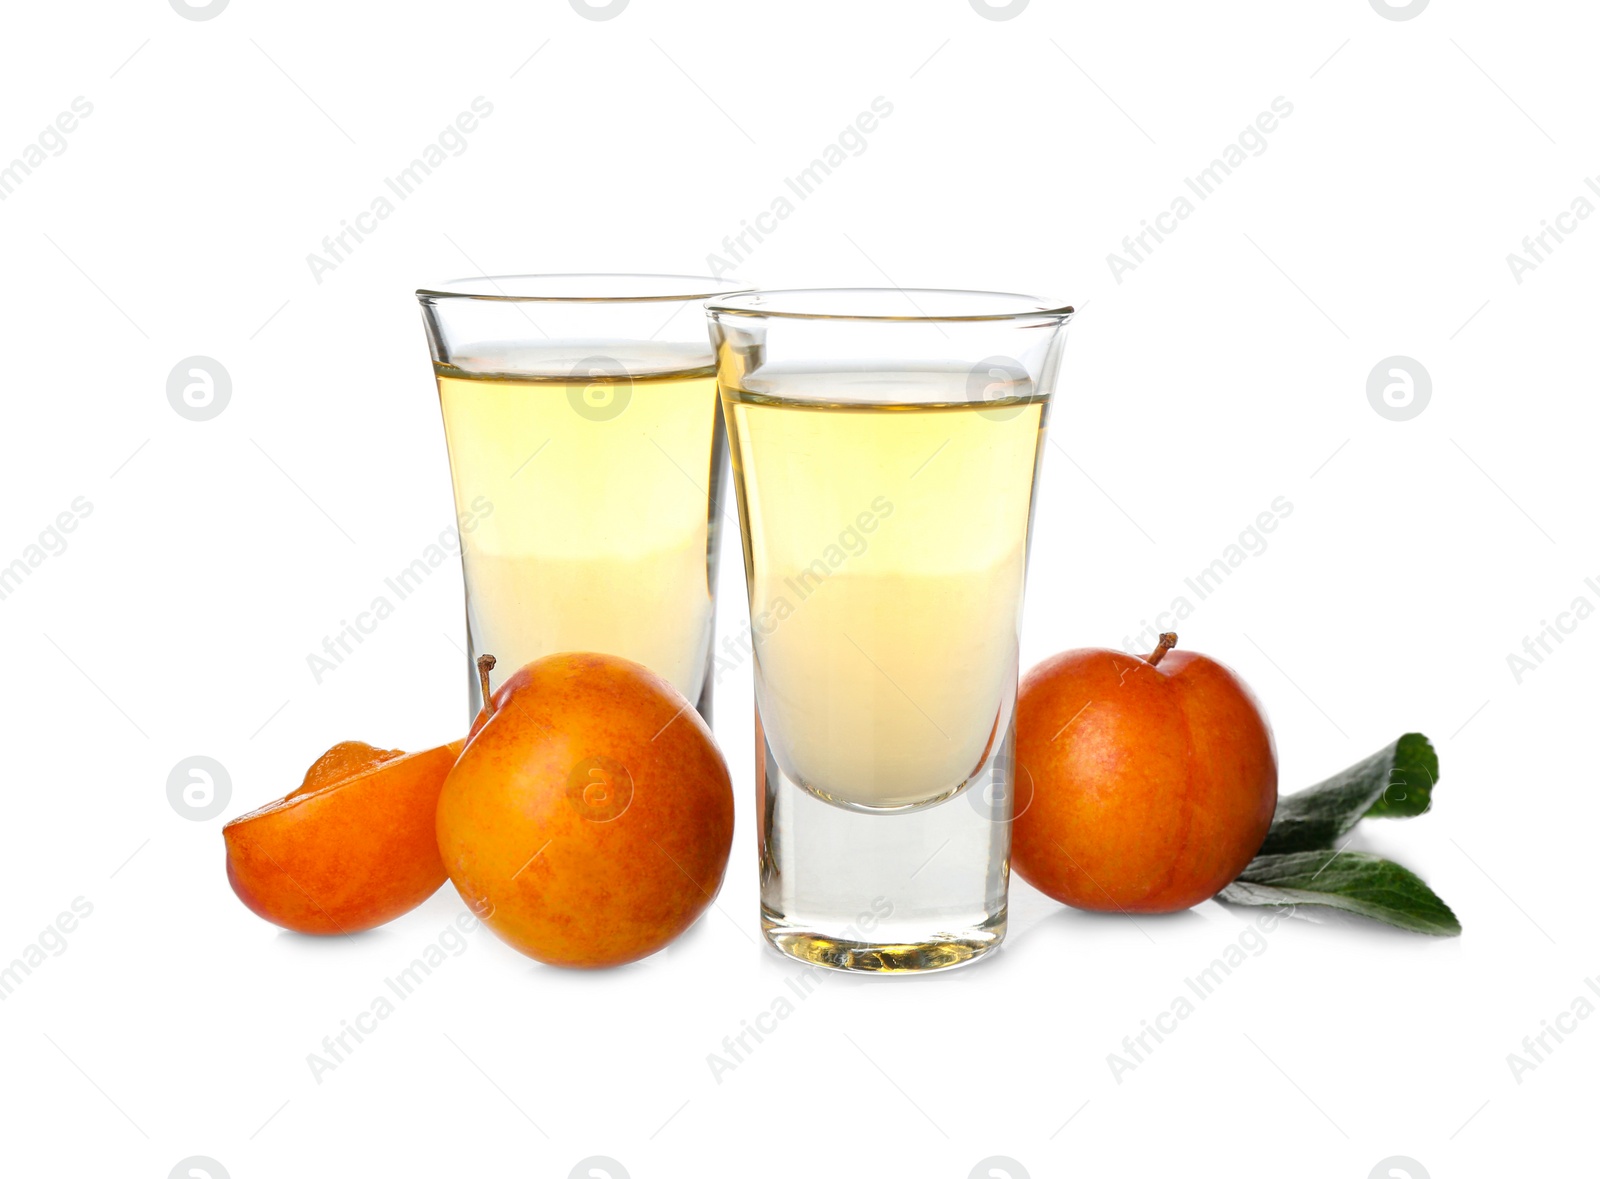 Photo of Delicious plum liquor and ripe fruits on white background. Homemade strong alcoholic beverage